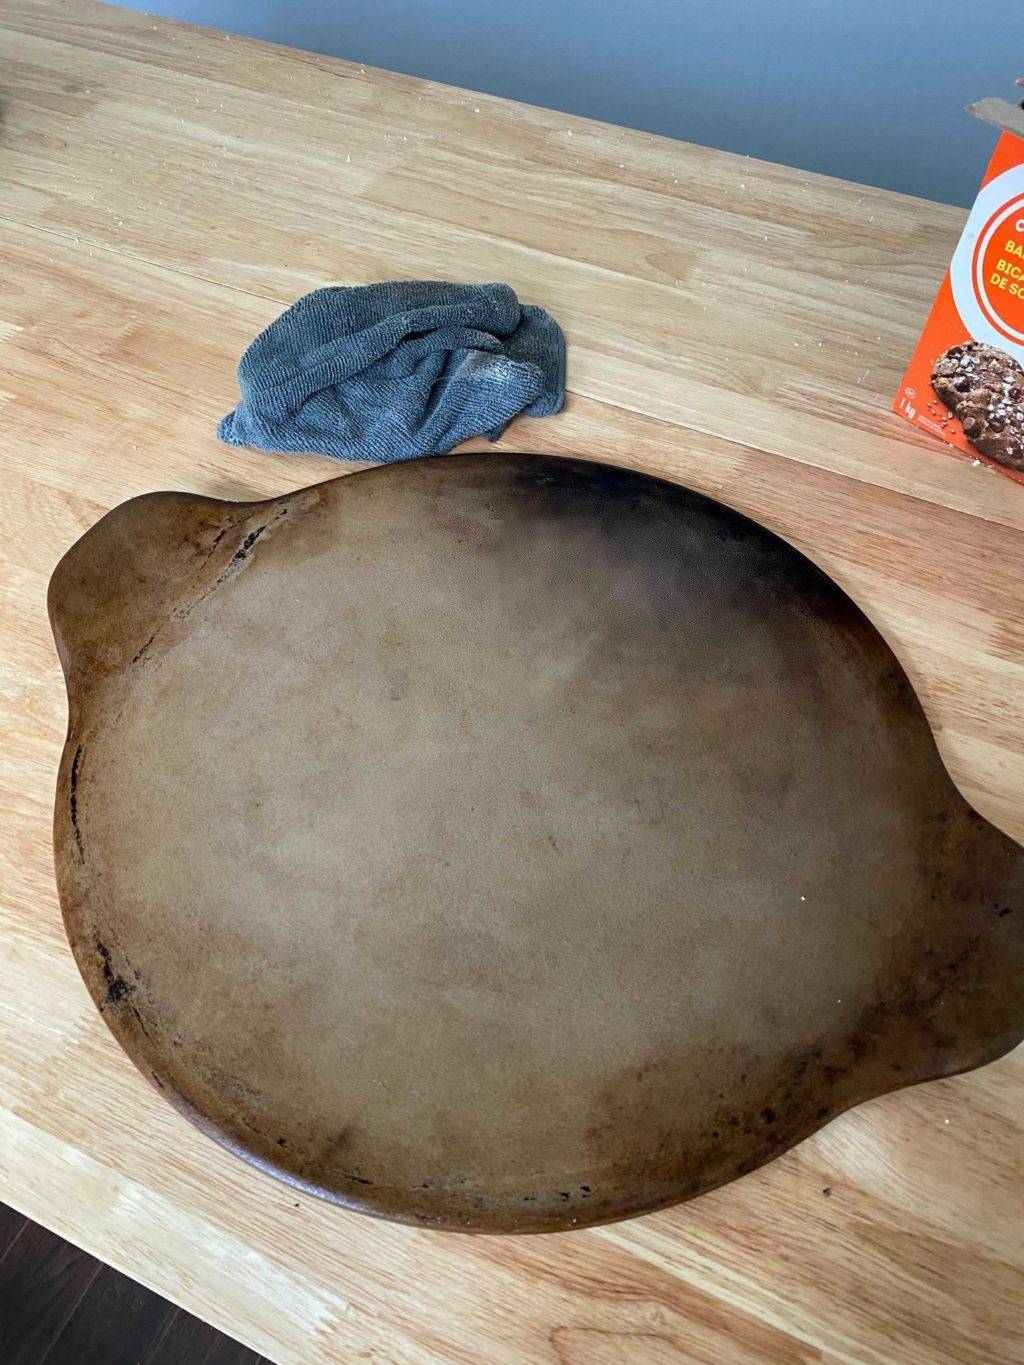 cleaned pizza stone